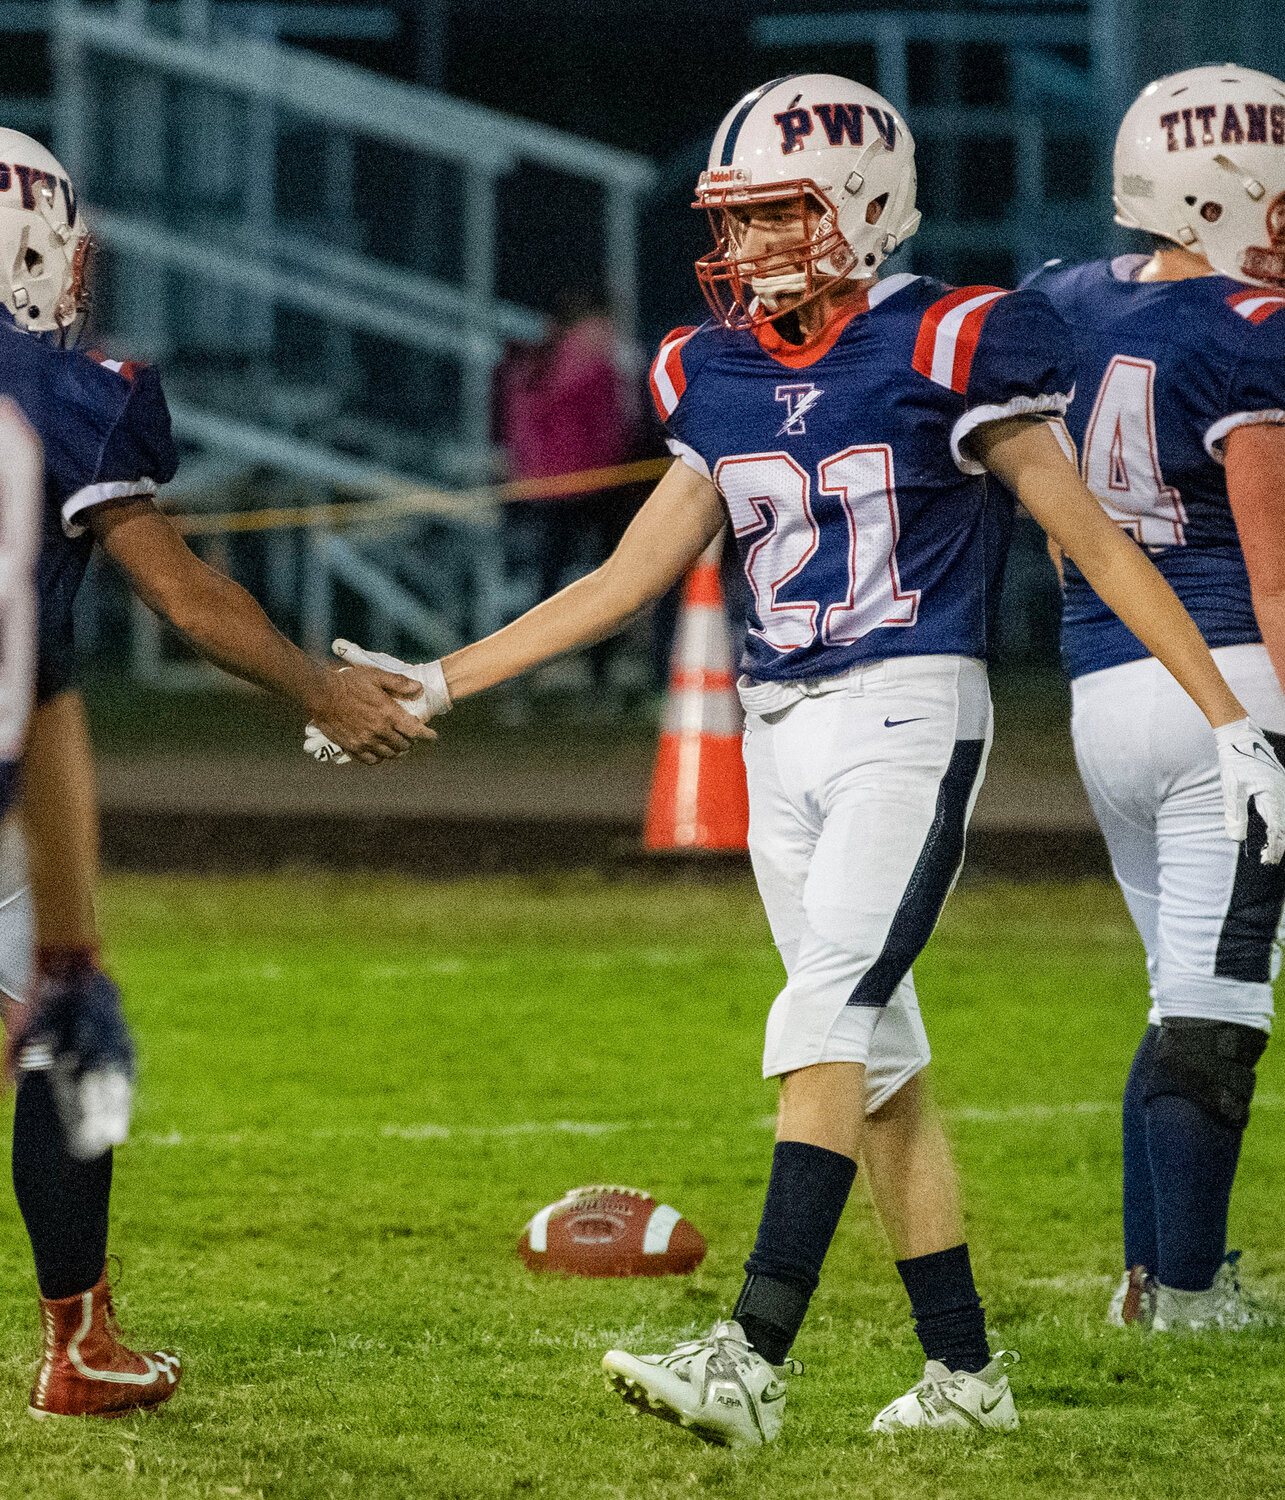 Pe Ell-Willapa Valley kicker Aiden Silva (21) gets a high-five from a teammate after a successful play against Morton-White Pass on Friday night in West Lewis County.